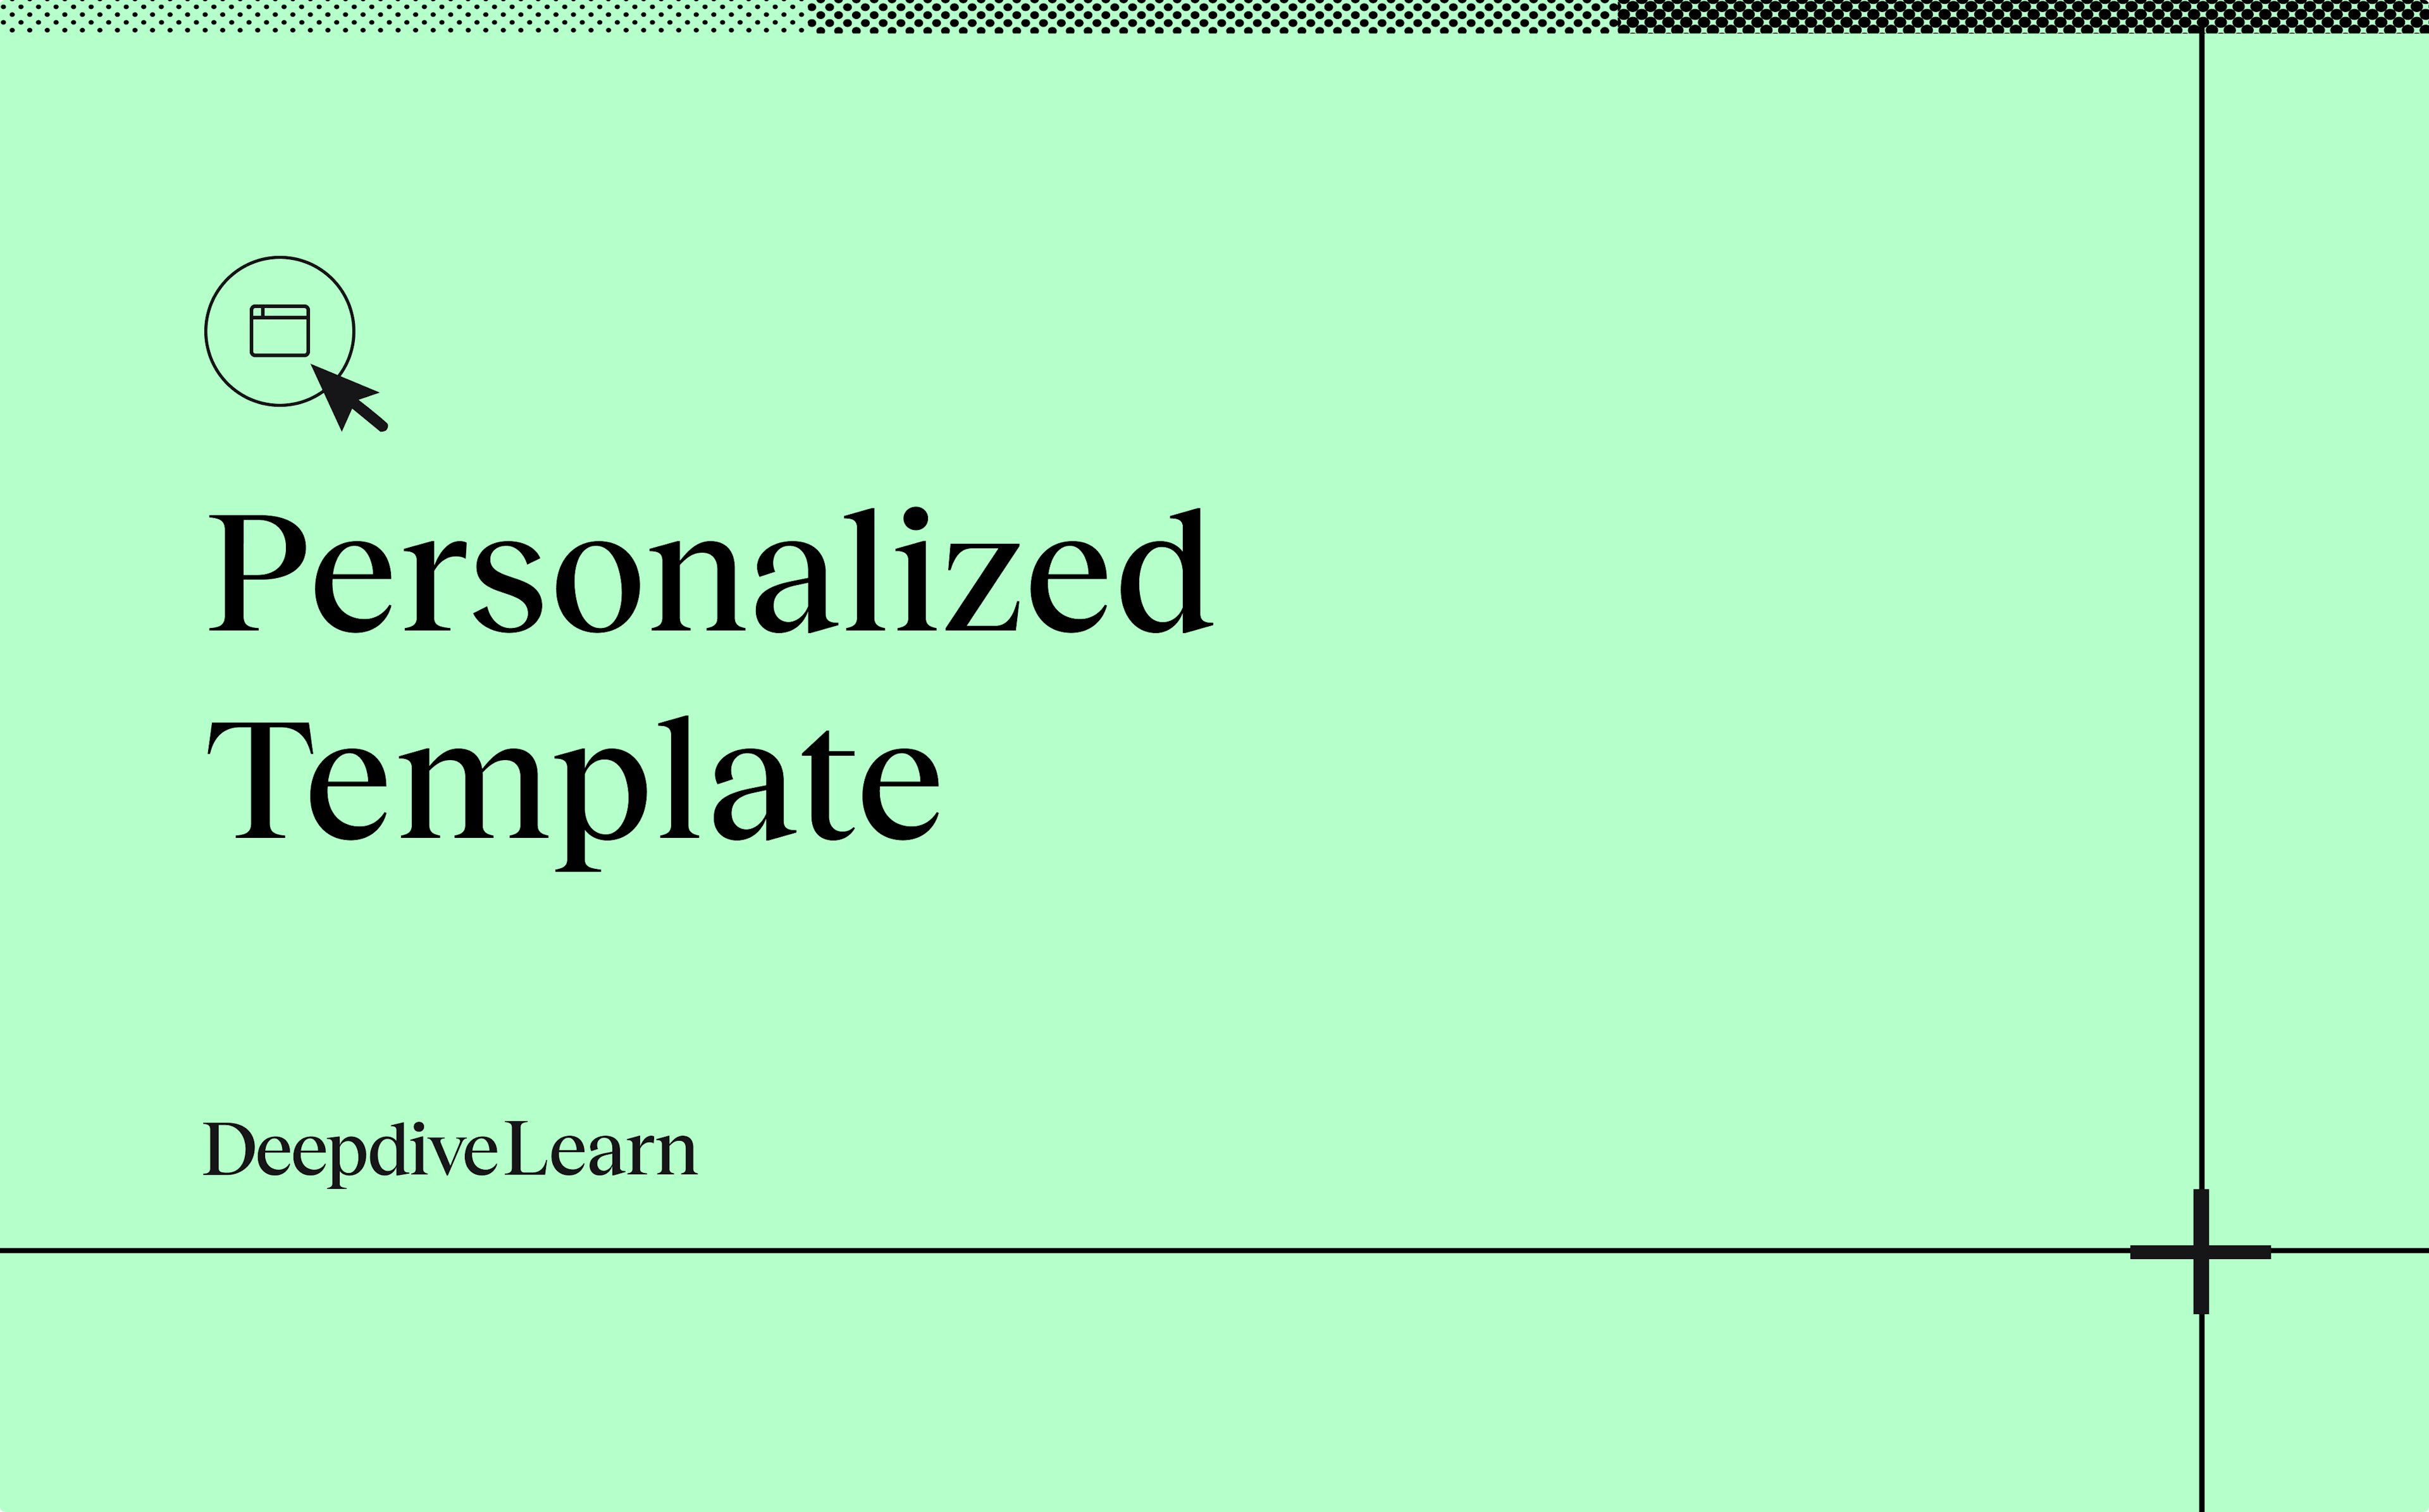 Personalized template by Deepdive Learn